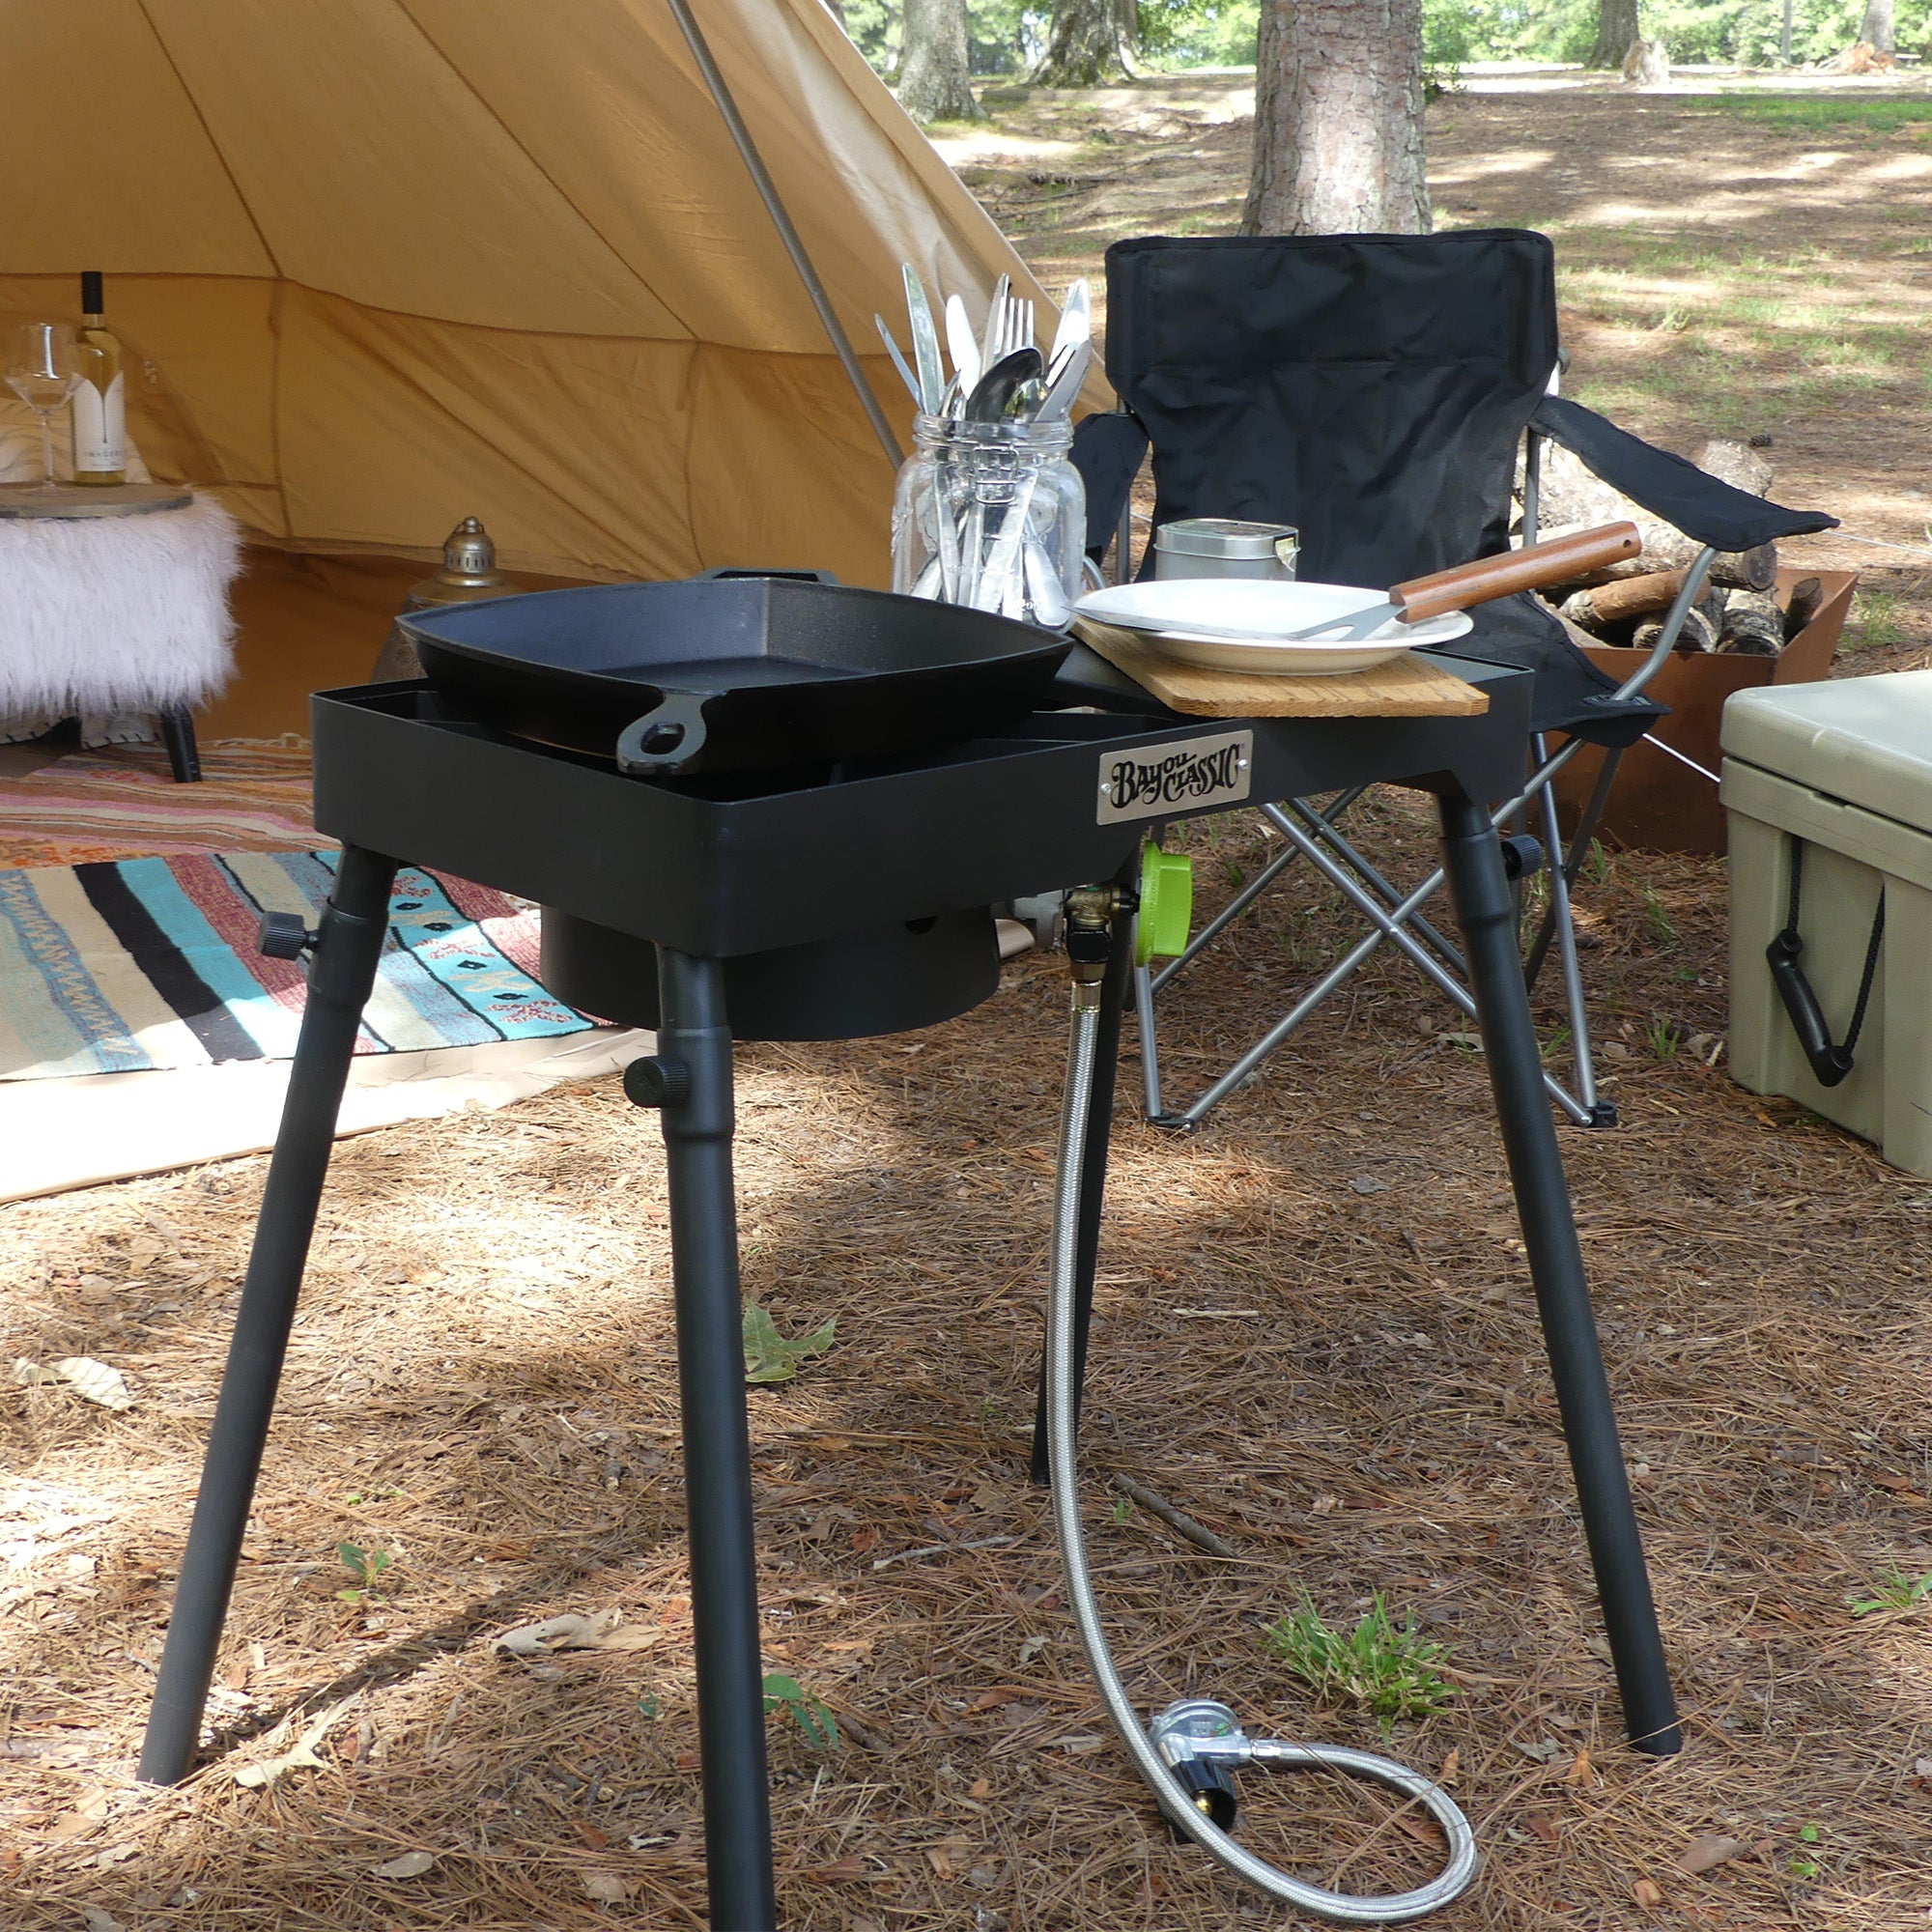 Bayou® Patio Camp Stove with Griddle